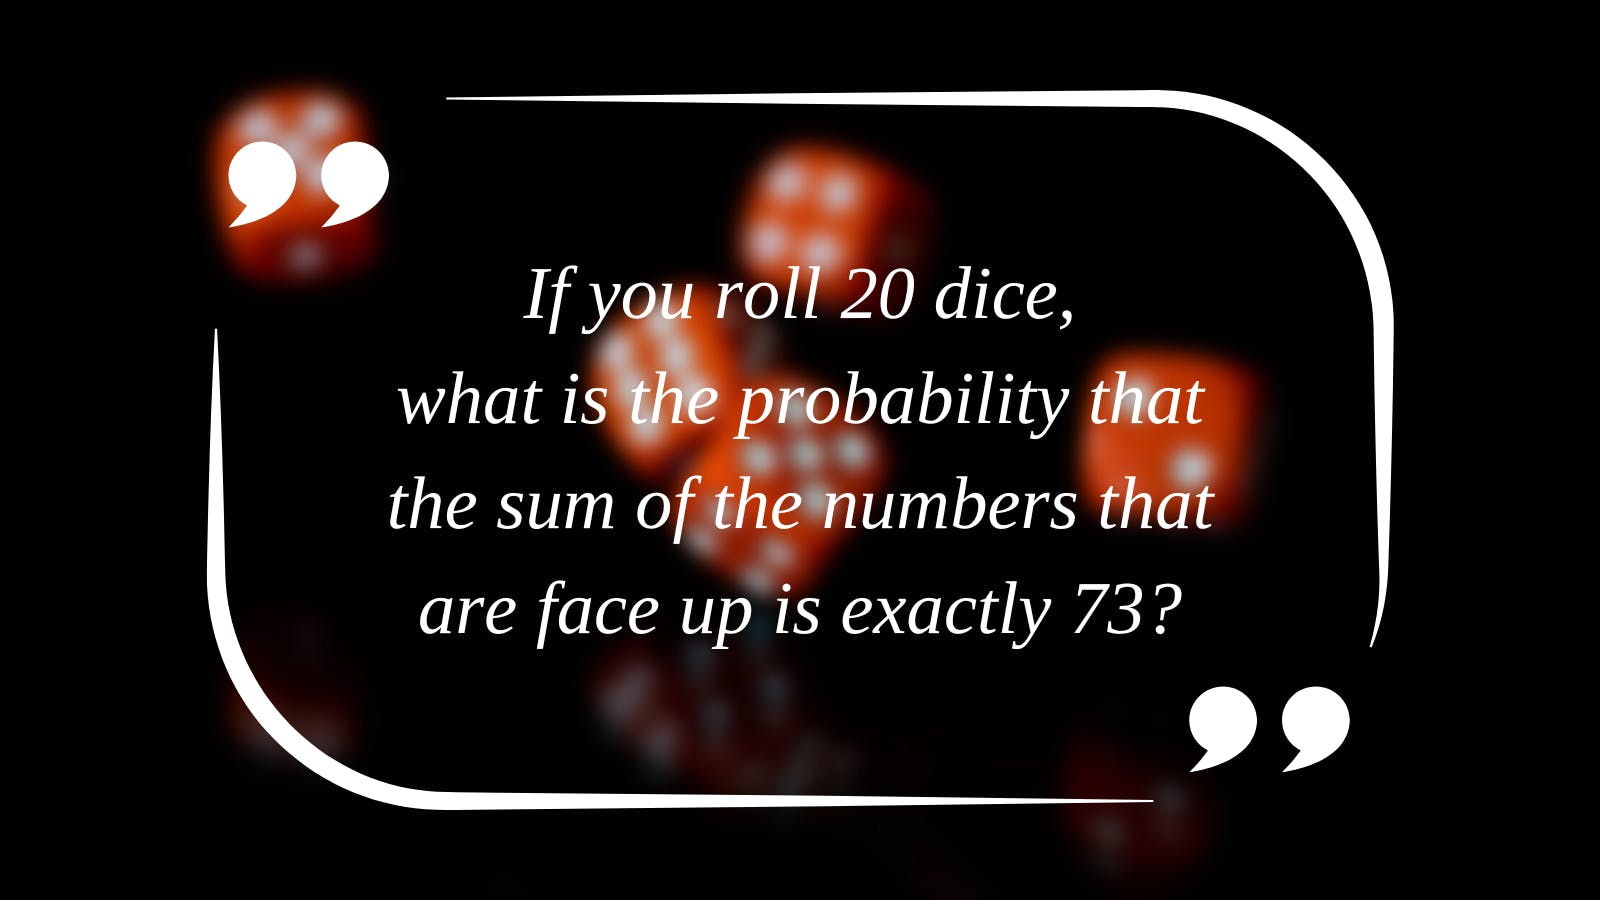 If you roll 20 dice, what is the probability that the sum of the numbers that are face up is exactly 73?